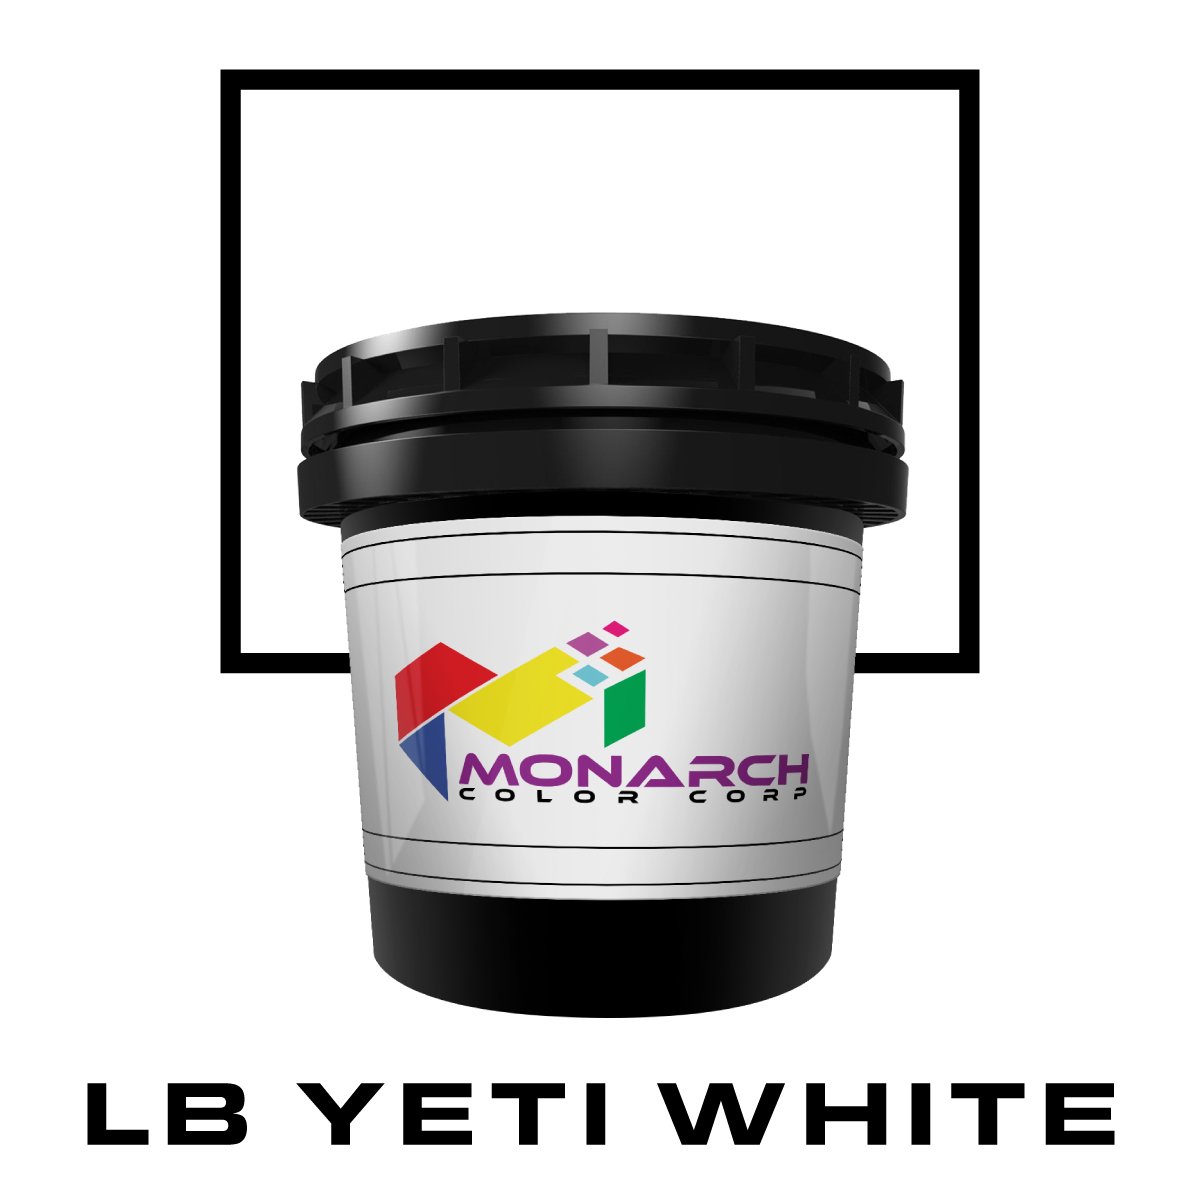 Image of MP8-0104 - LB YETI WHITE - Poly/Cotton Blend Plastisol Ink (by Monarch Color)